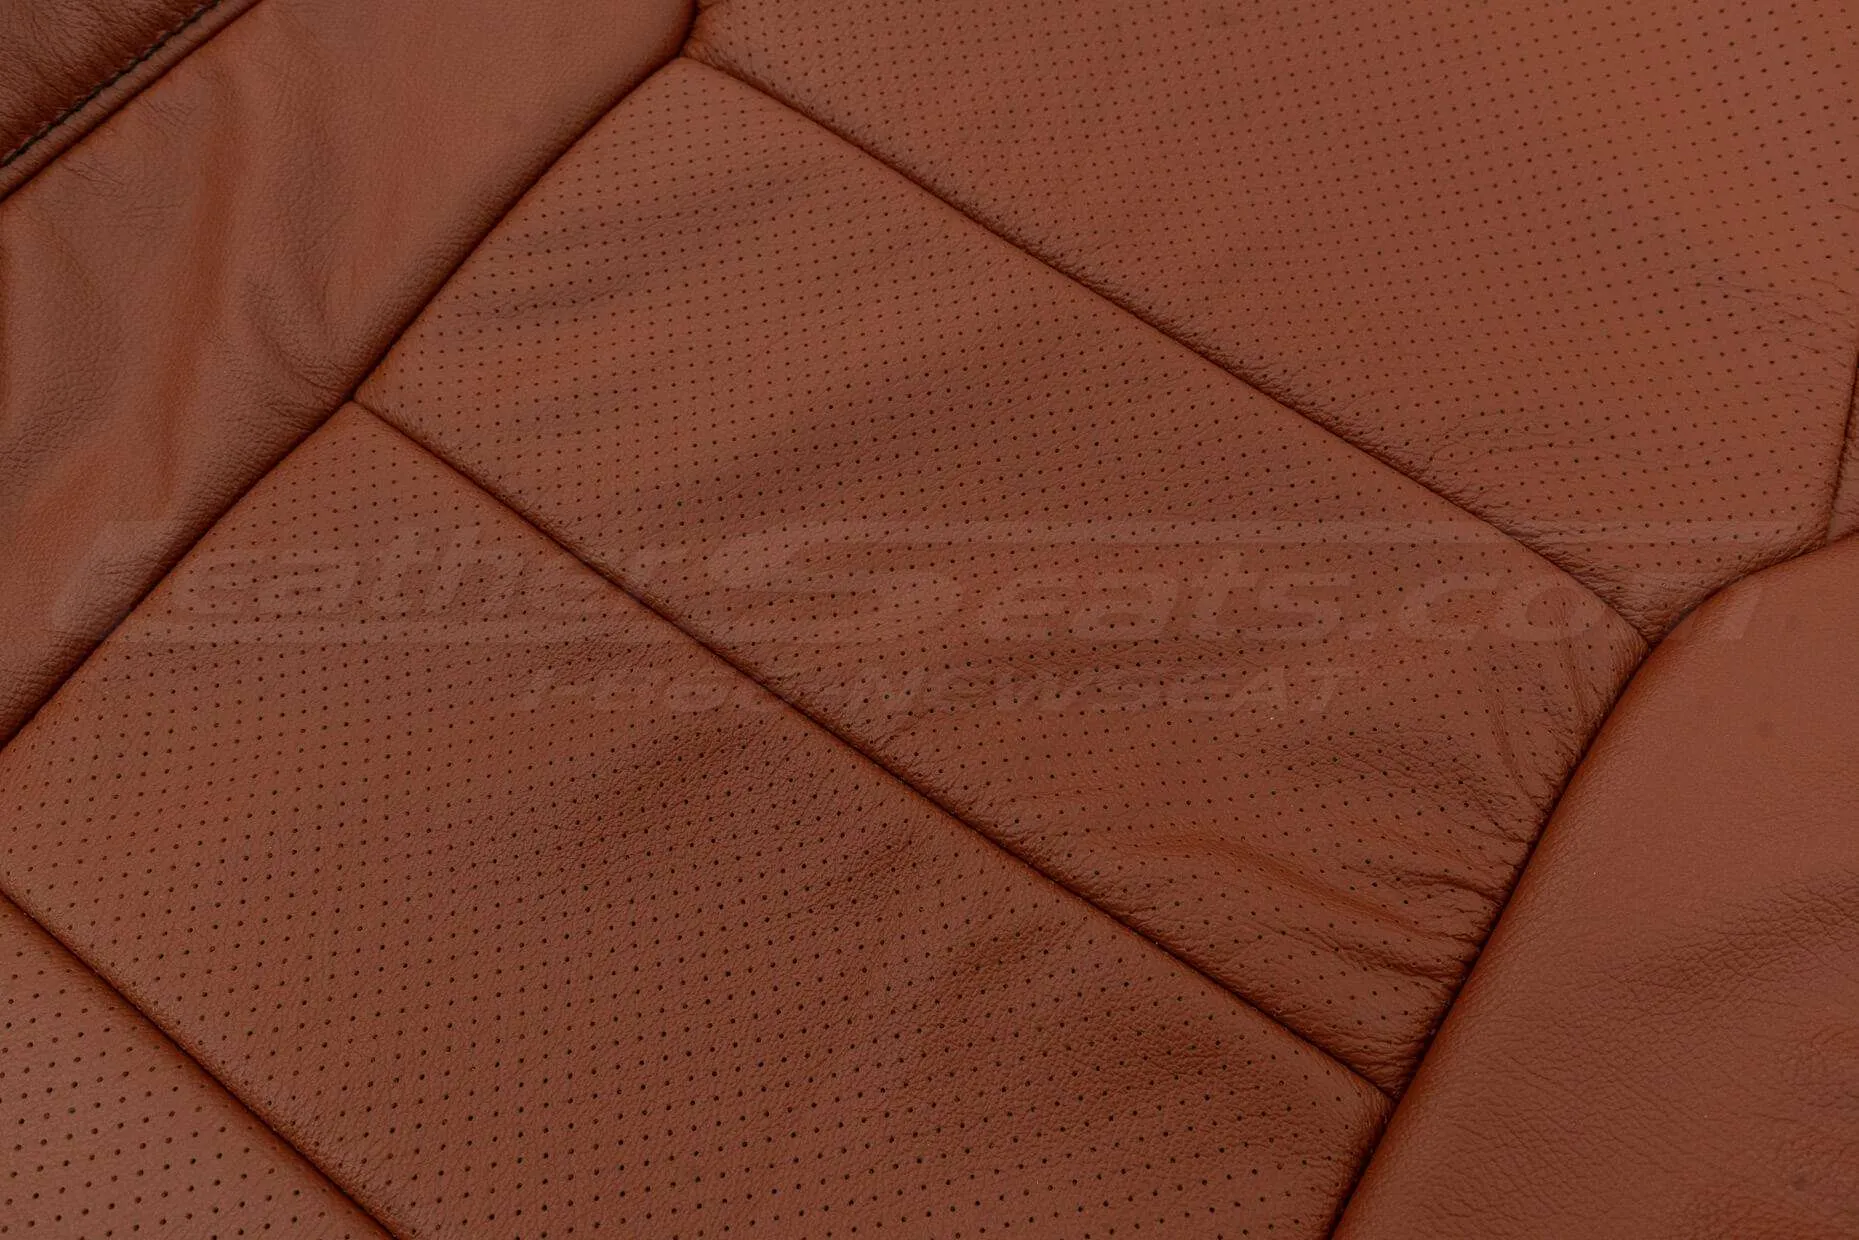 Backrest leather texture and perforation close-up